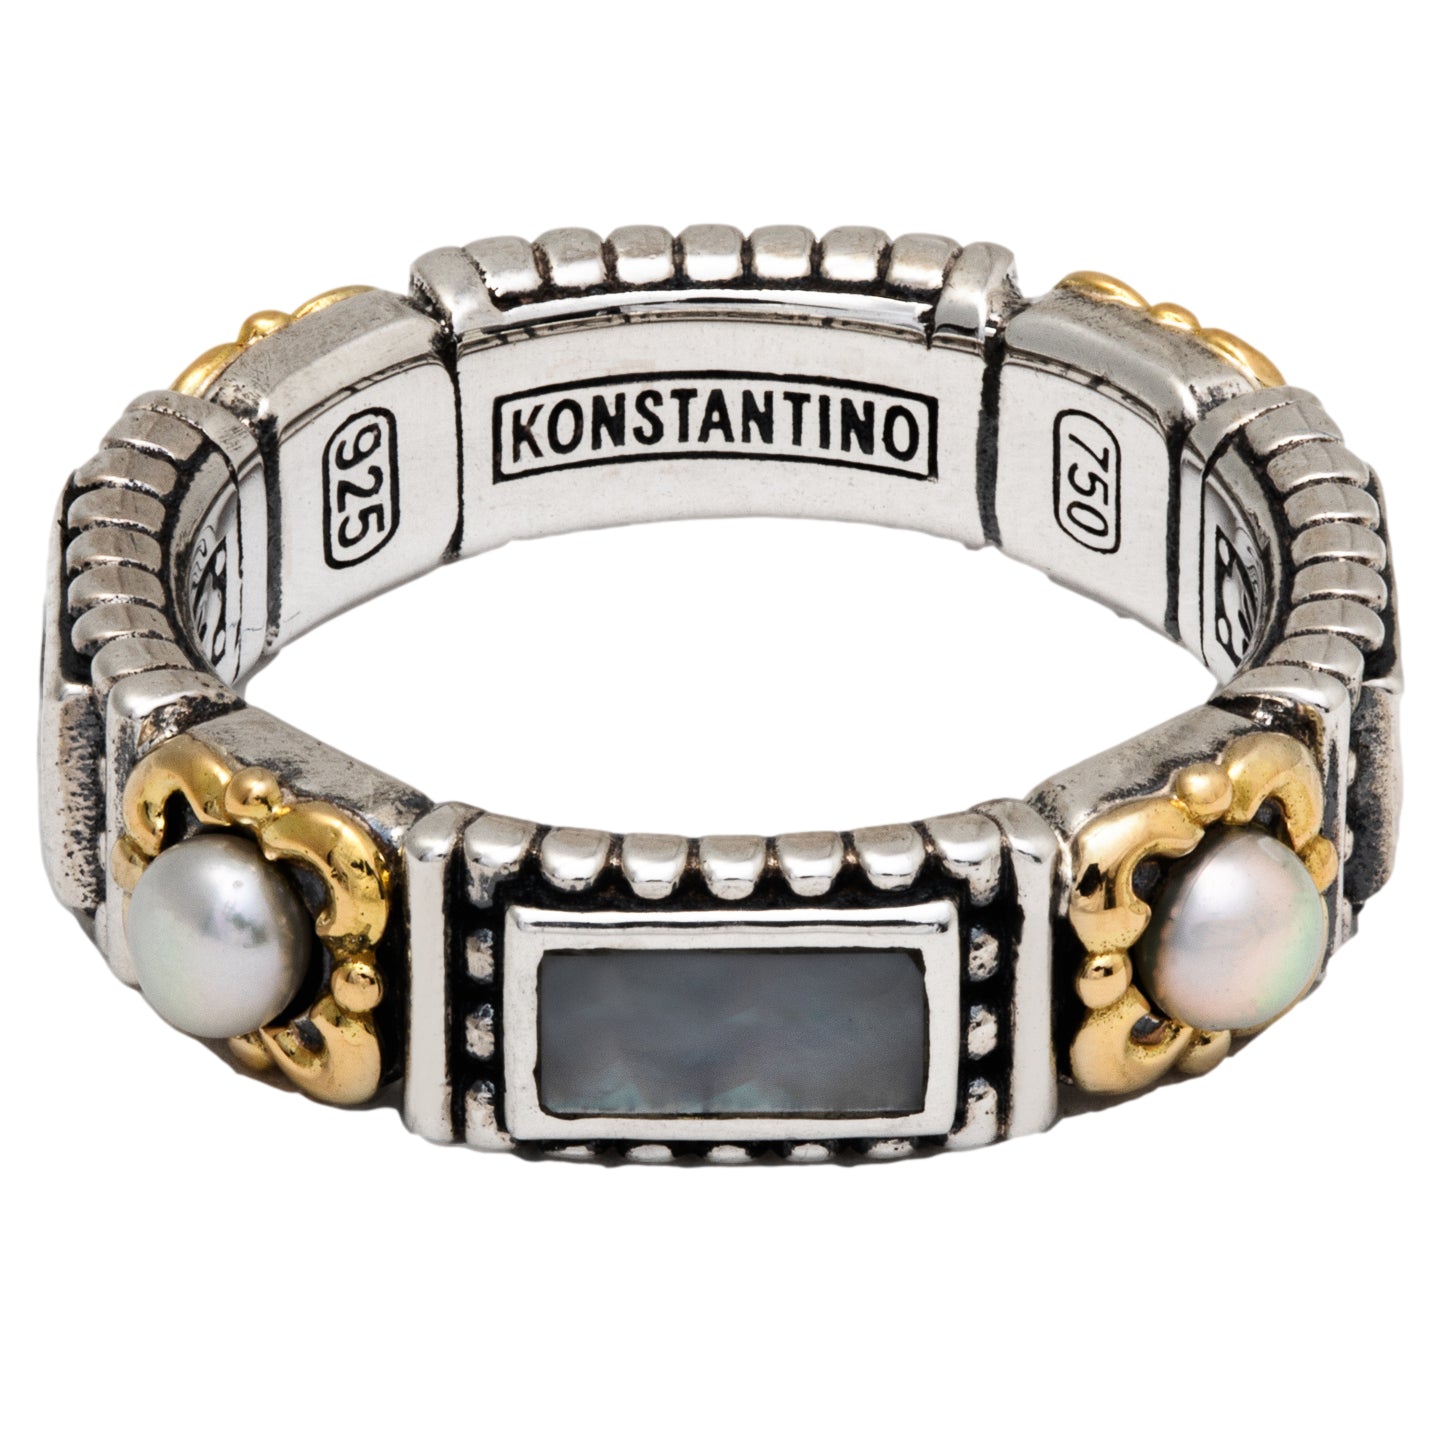 Konstantino Women's Sterling Silver & 18K Gold Band Ring, Hestia Collection